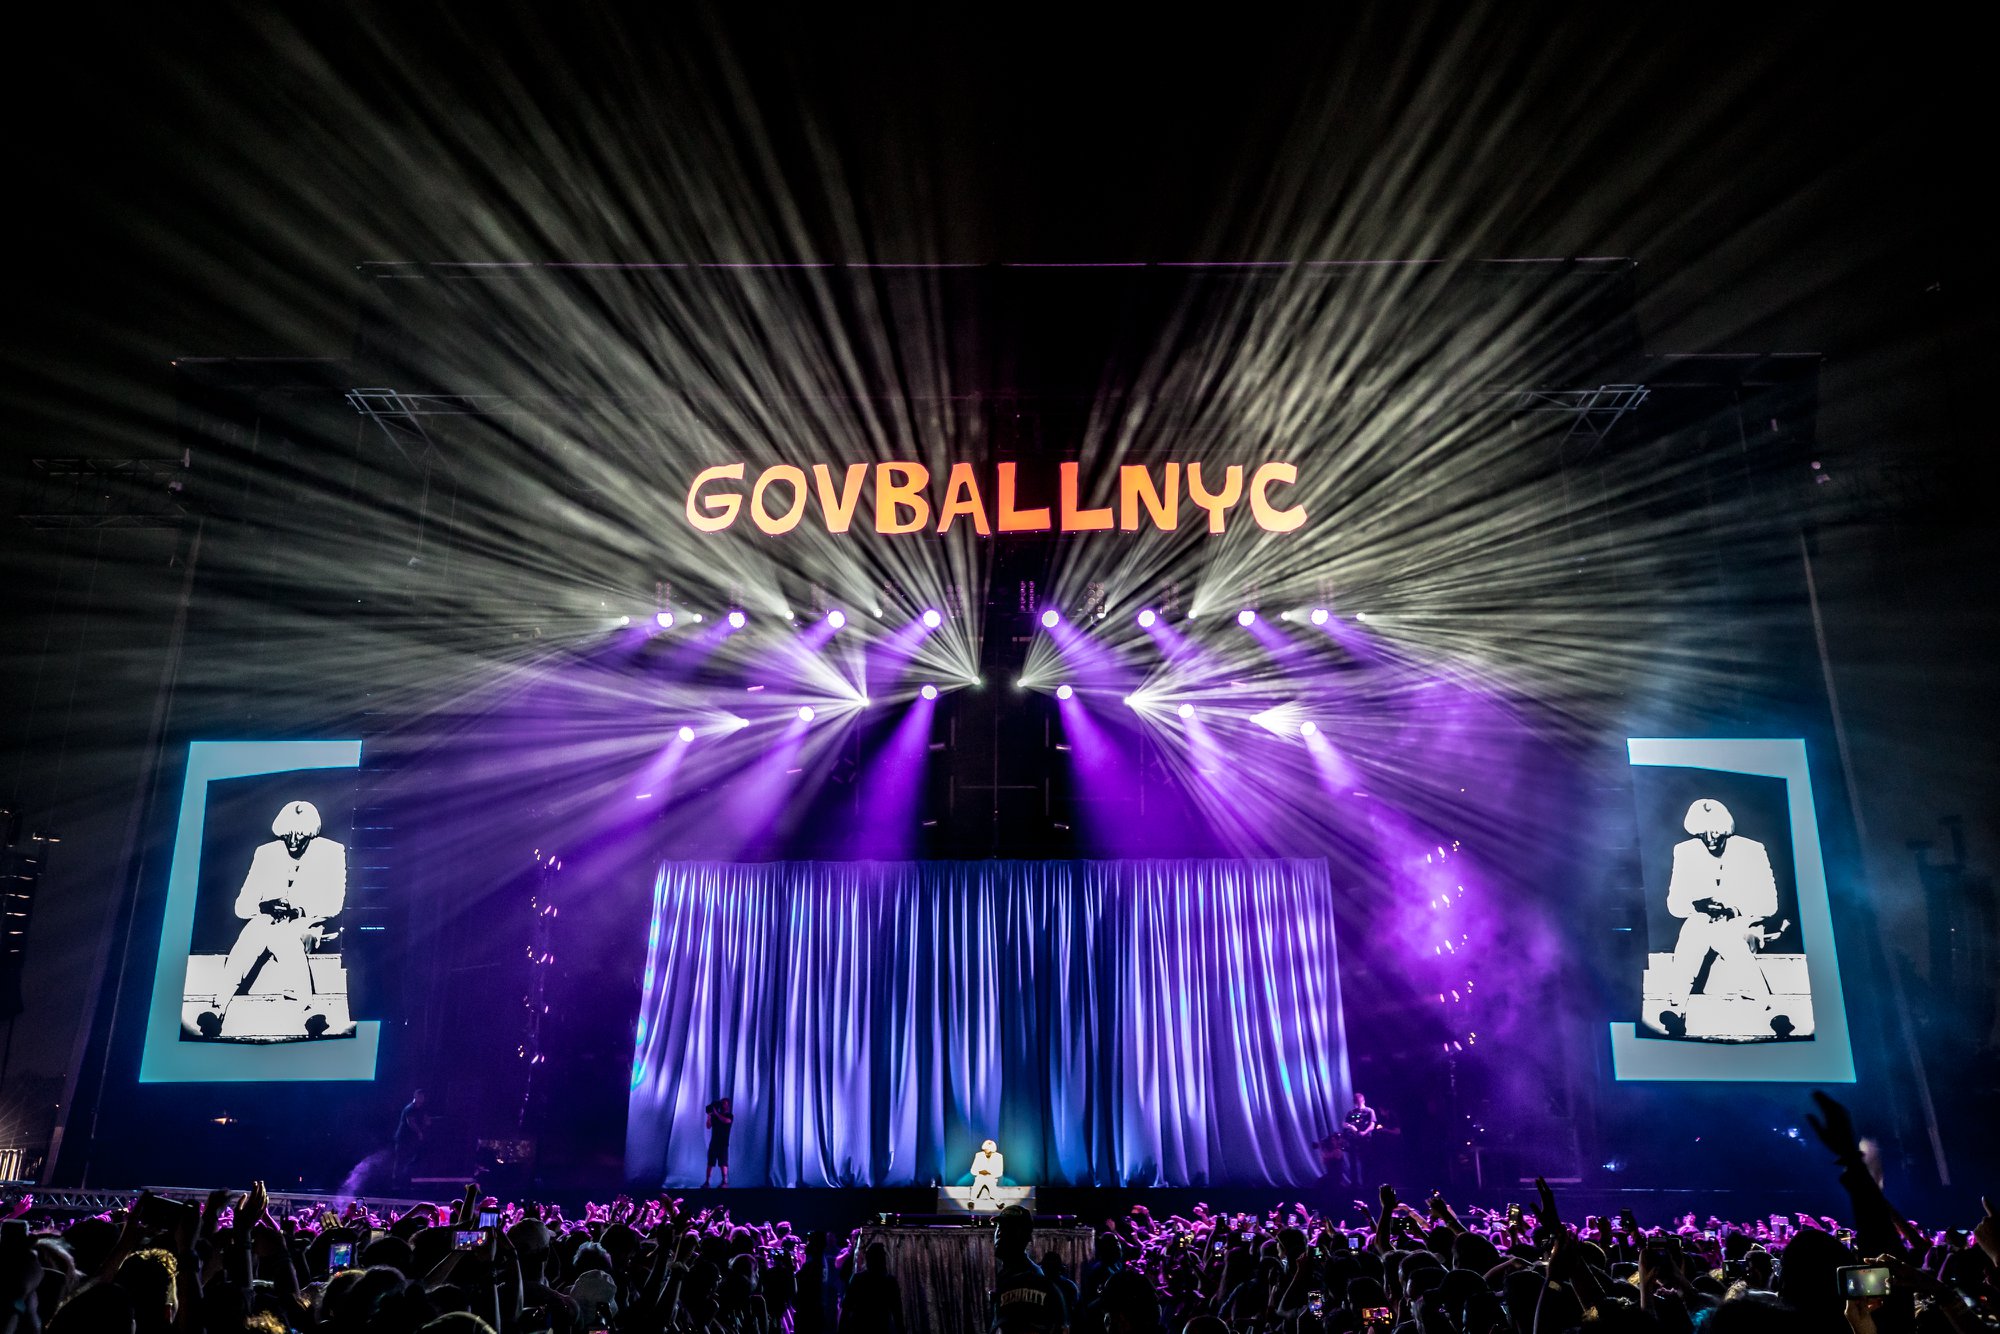 Governors Ball Celebrates 10th Anniversary with Billie Eilish, A$AP Rocky, and More